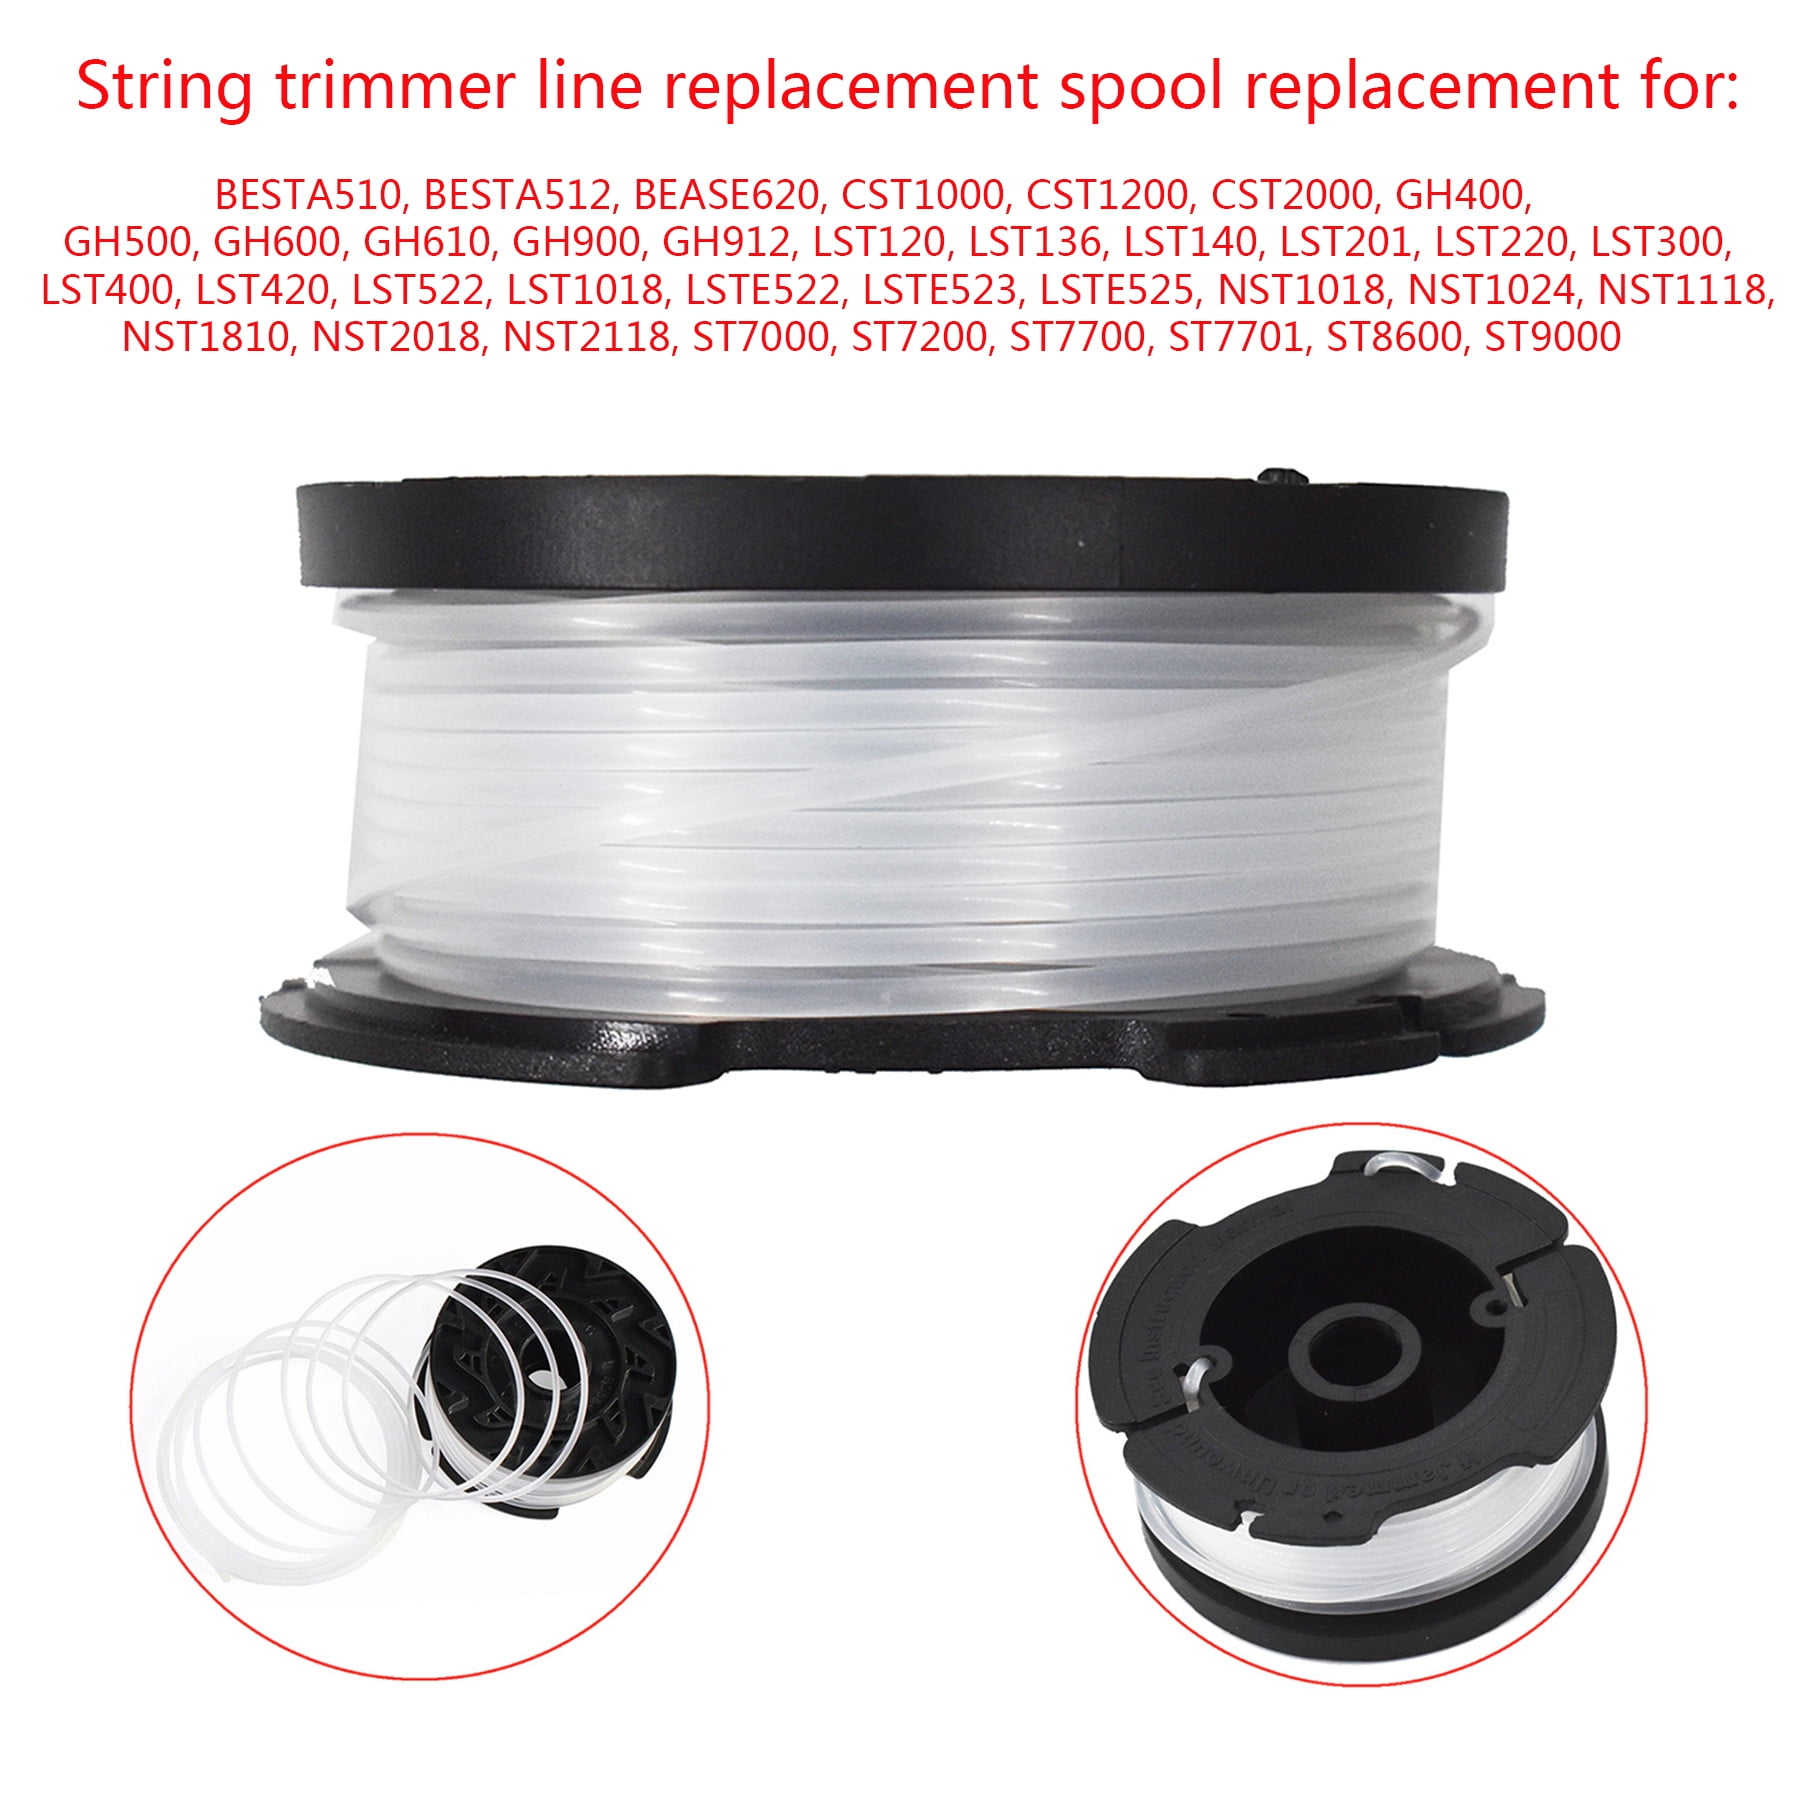 Replacement Trimmer Line Spool For BESTA510 BESTA512 For Black And